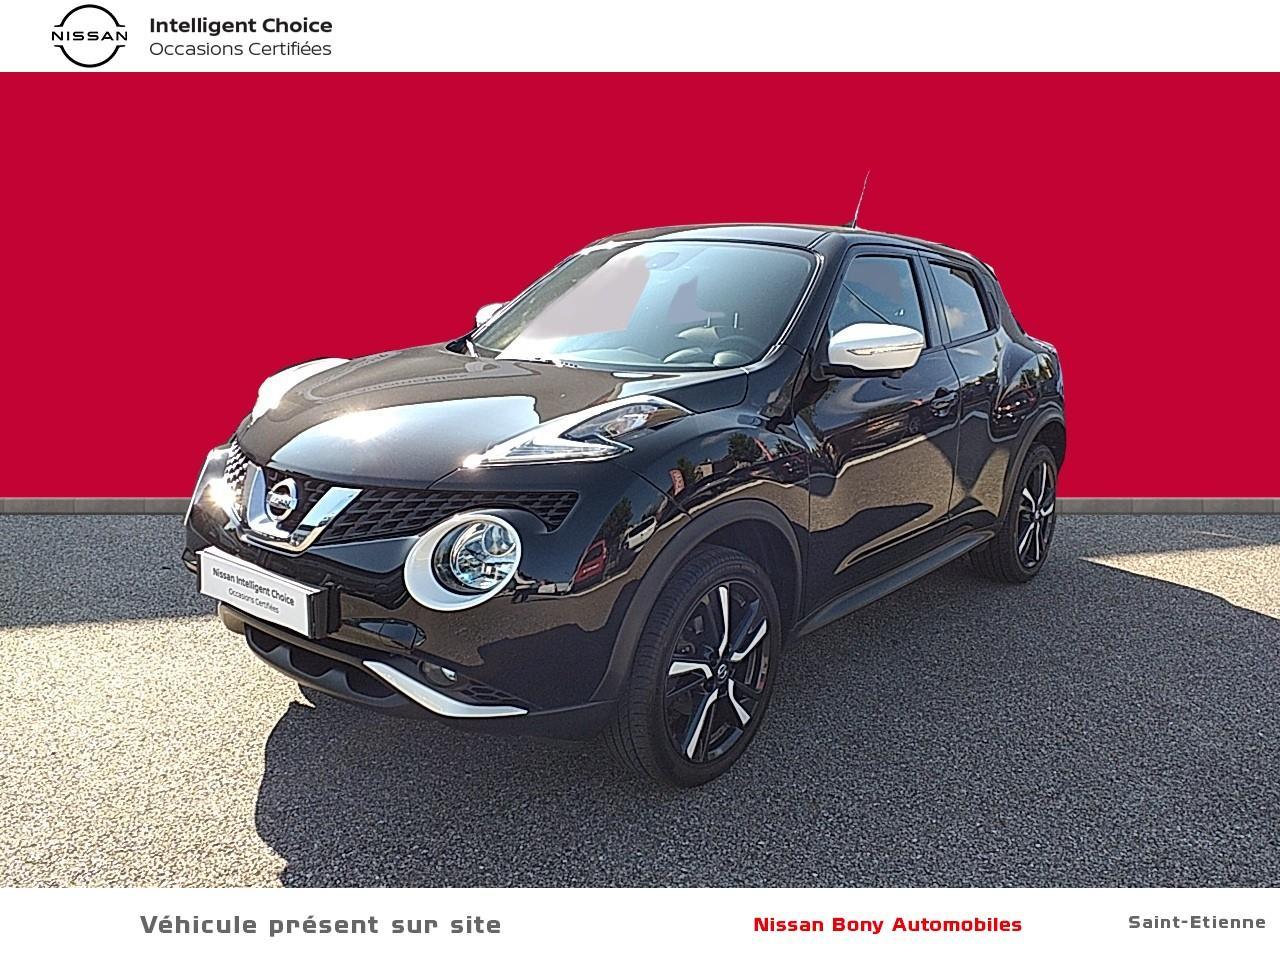 Nissan Juke 2016 - DCI 110CH 6MT 4X2,SERIE SPECIALE N-VISION,NOIR PERSO BLANCHE